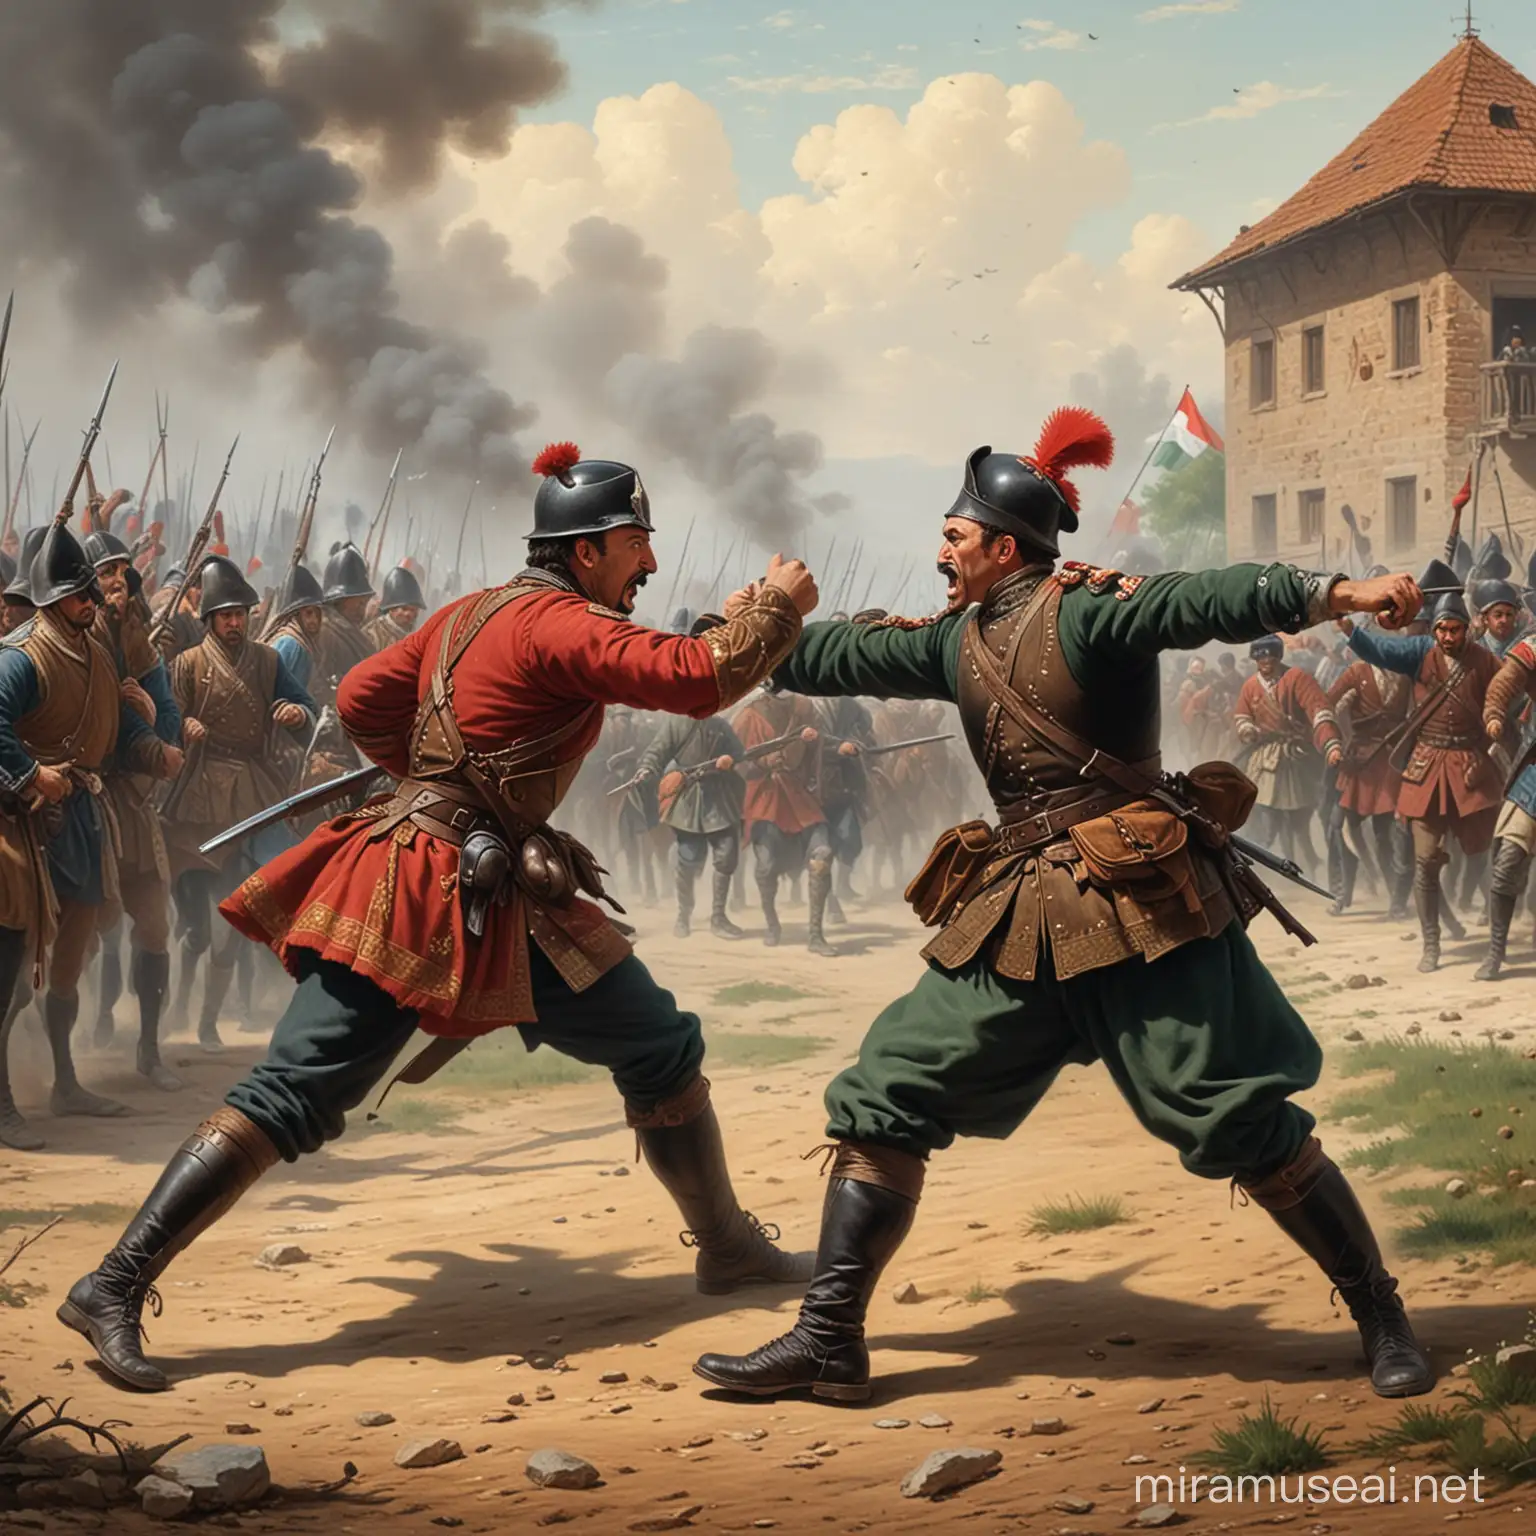 17th Century Hungarian Soldier Engages in Combat with Turkish Opponent